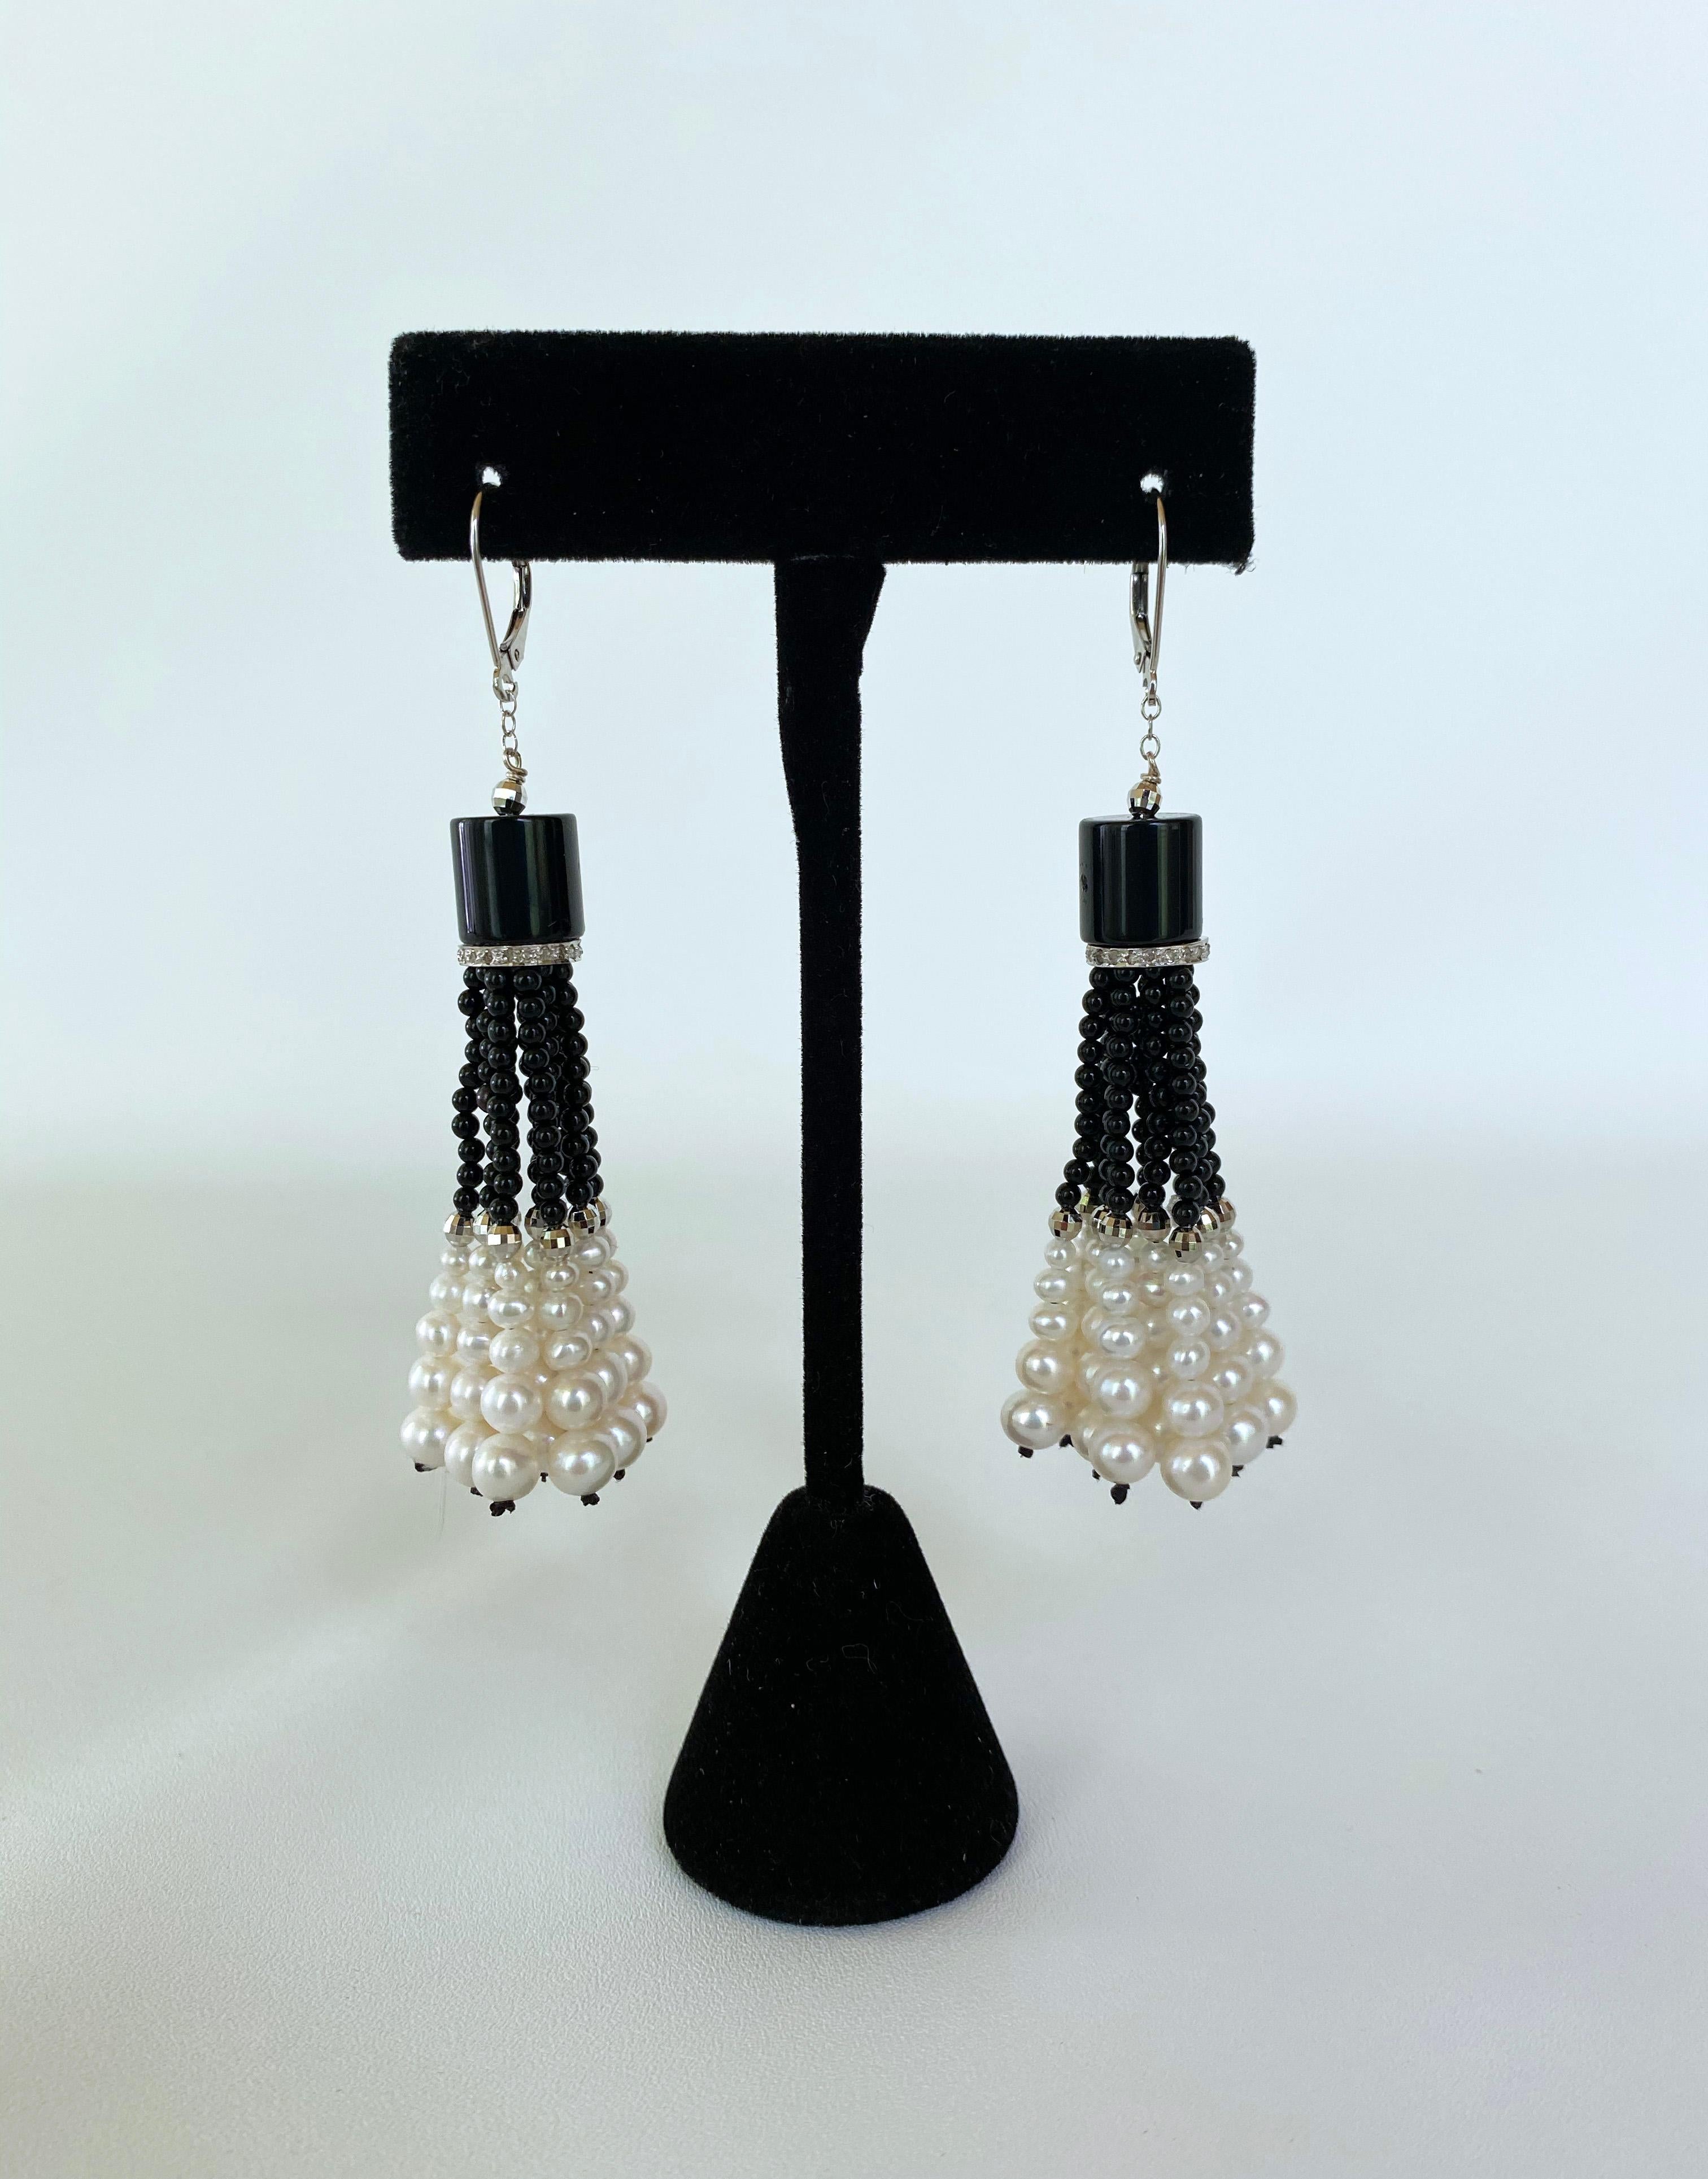 Art Deco inspired Earrings by Marina J. This nostalgic pair feature a cylindrical Black Onyx bead sitting atop a White Gold plated Silver -  Diamond encrusted roundel - from which graduated strands of Black Onyx, White Gold plated Silver findings